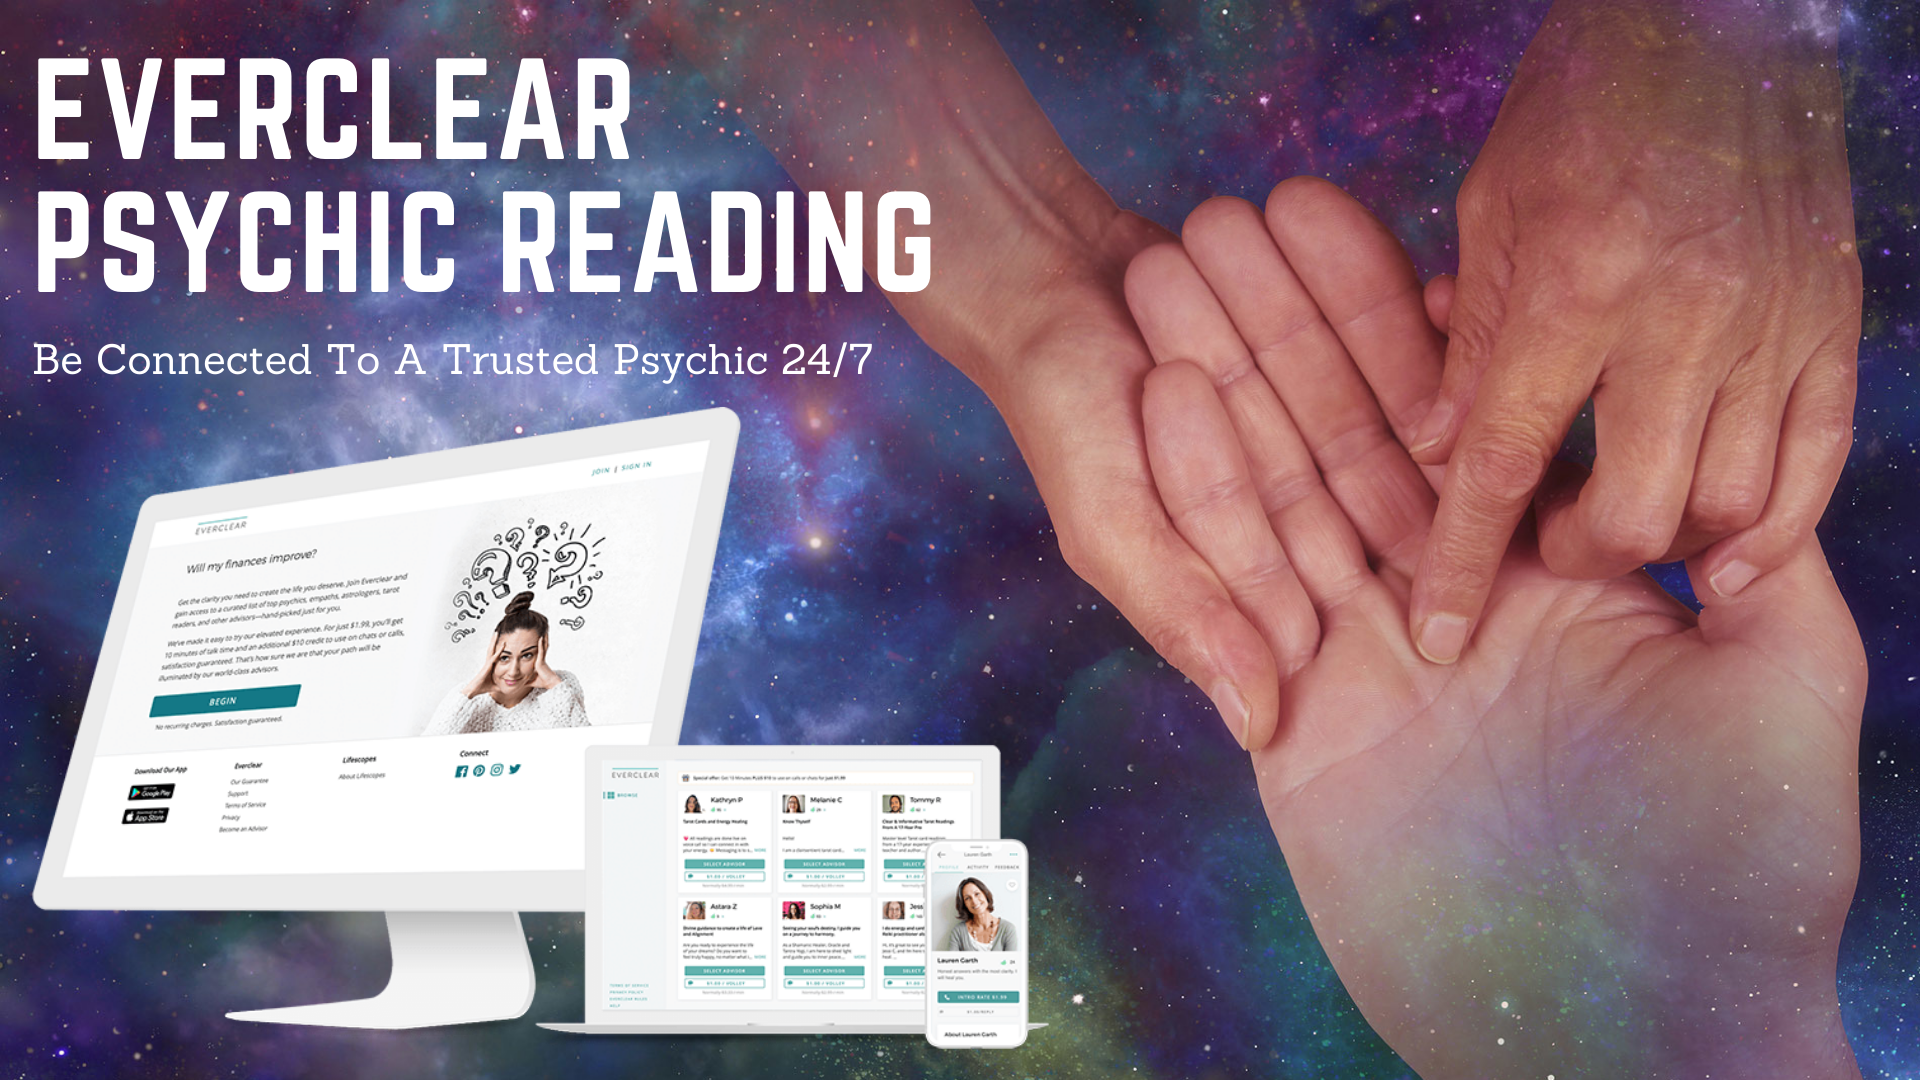 Everclear Psychic Reading - Be Connected To A Trusted Psychic 24/7